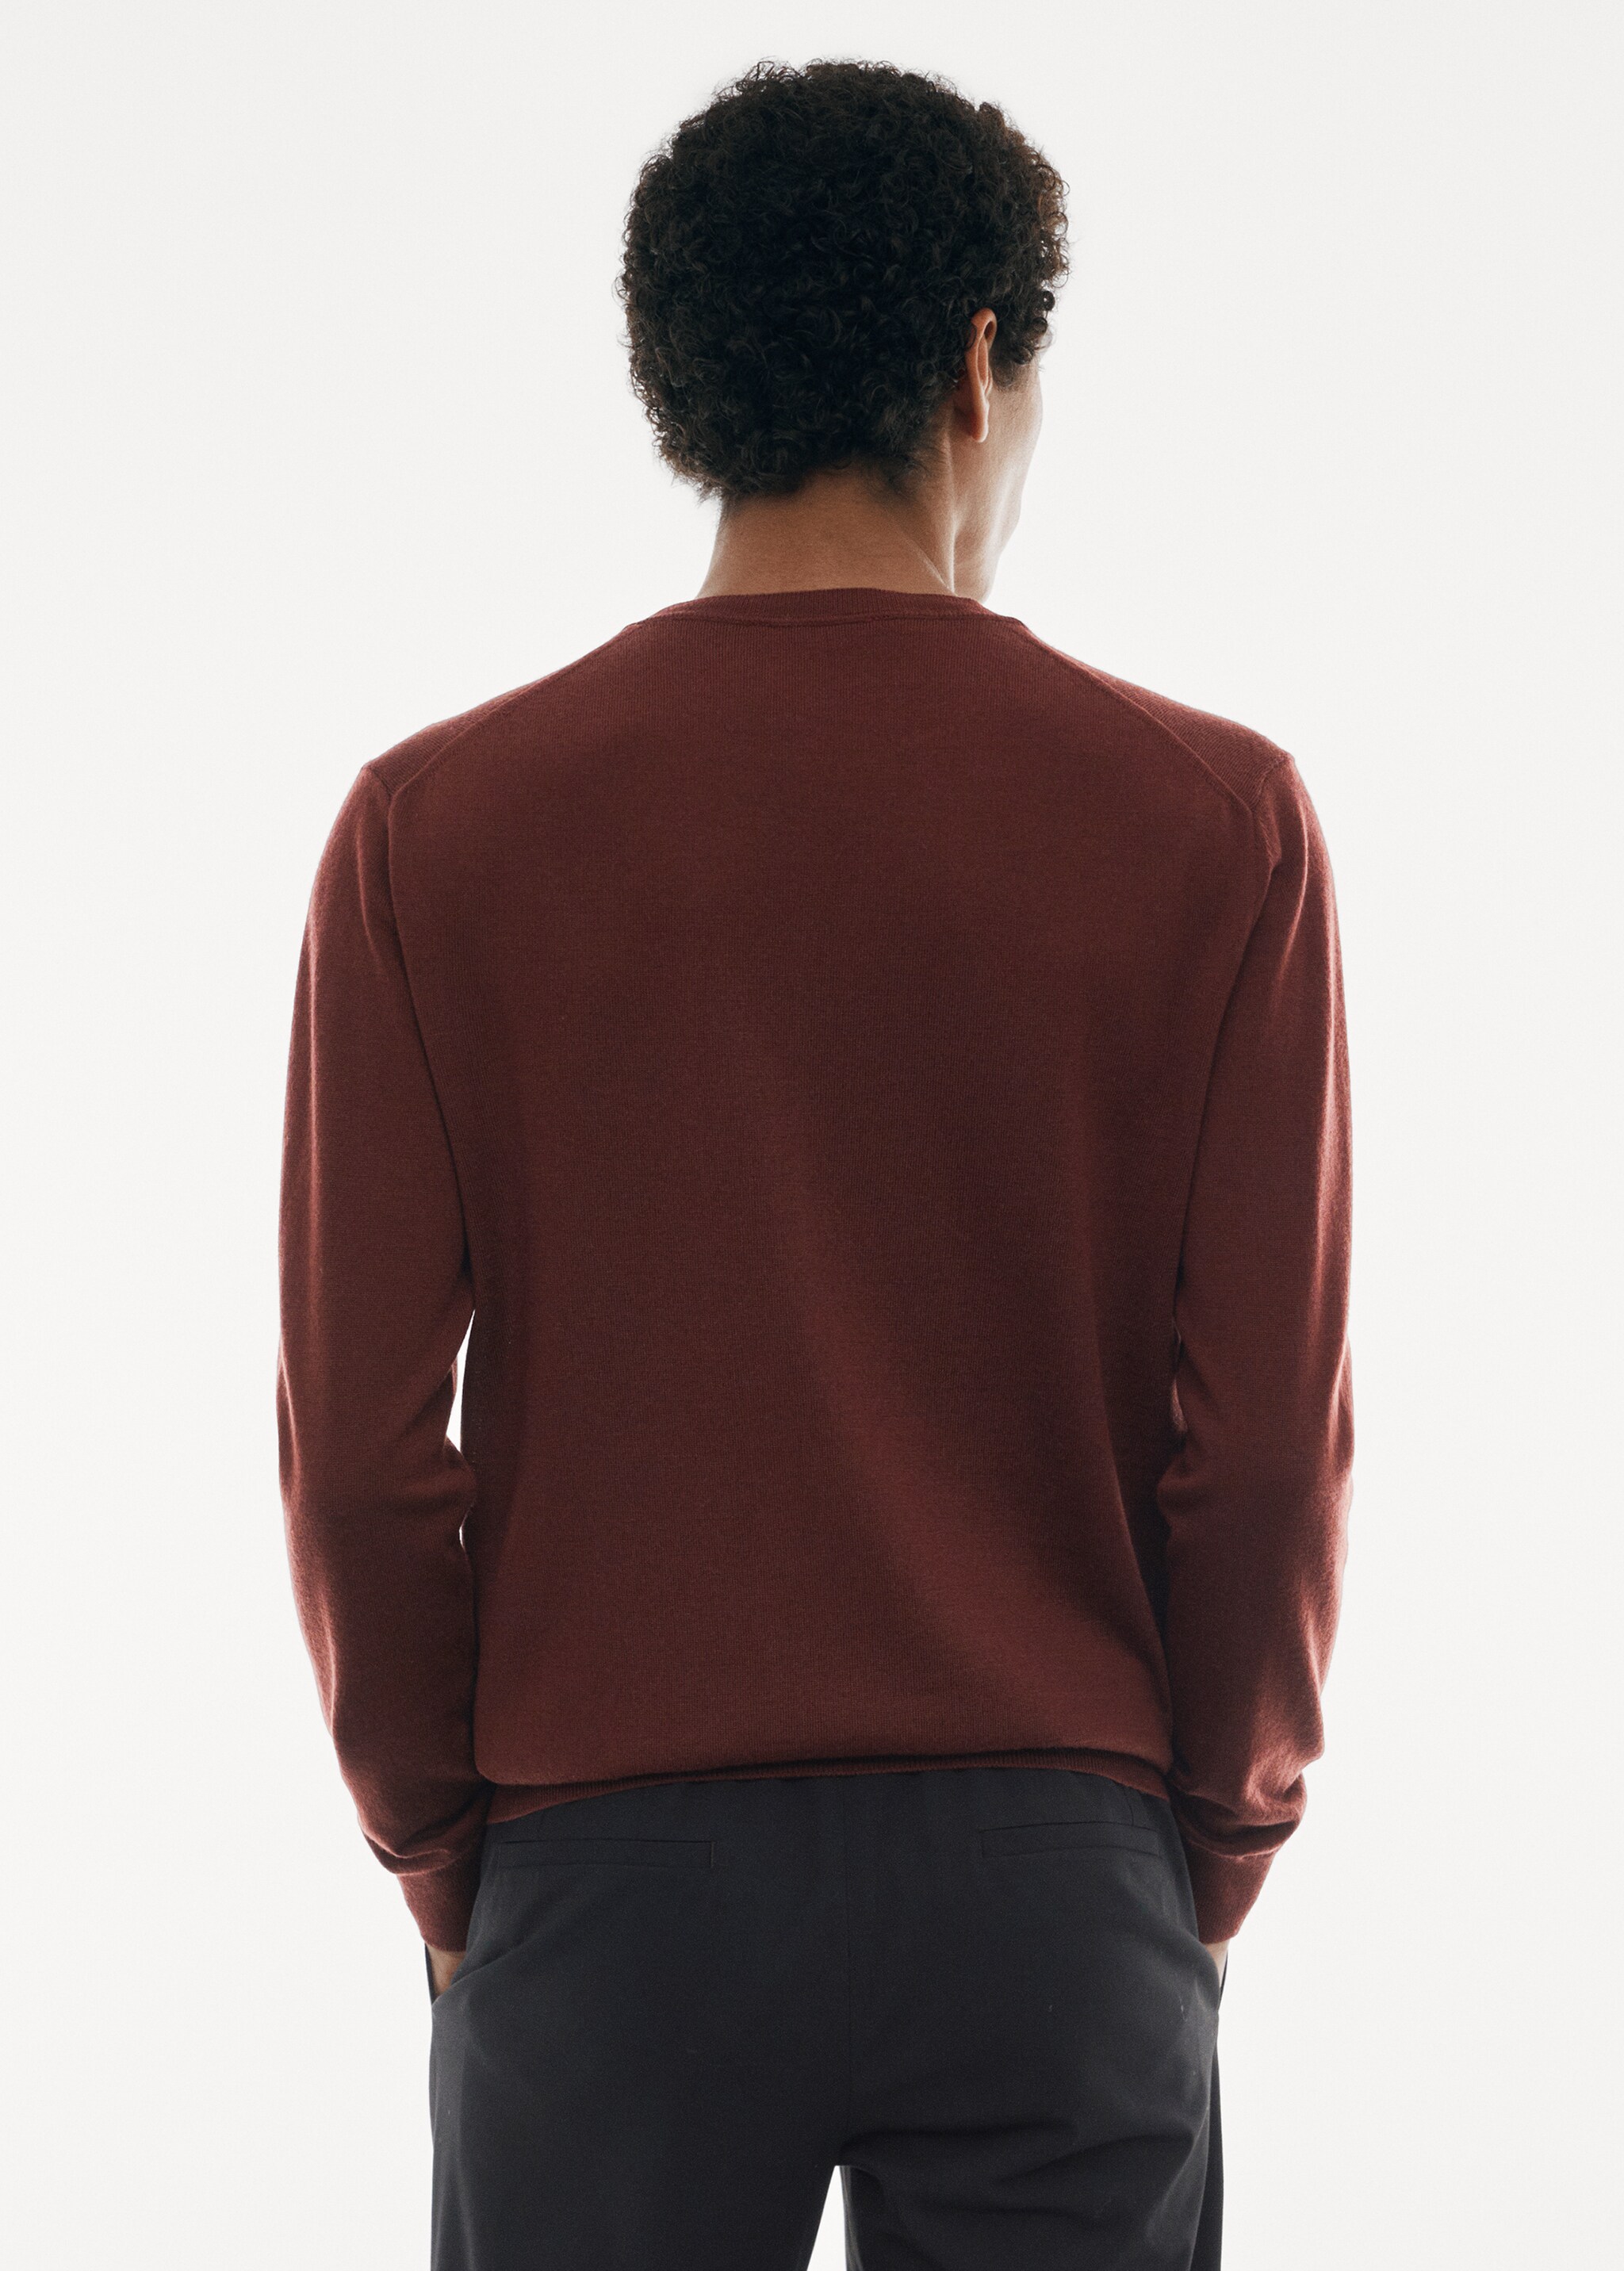 Merino wool washable sweater - Reverse of the article